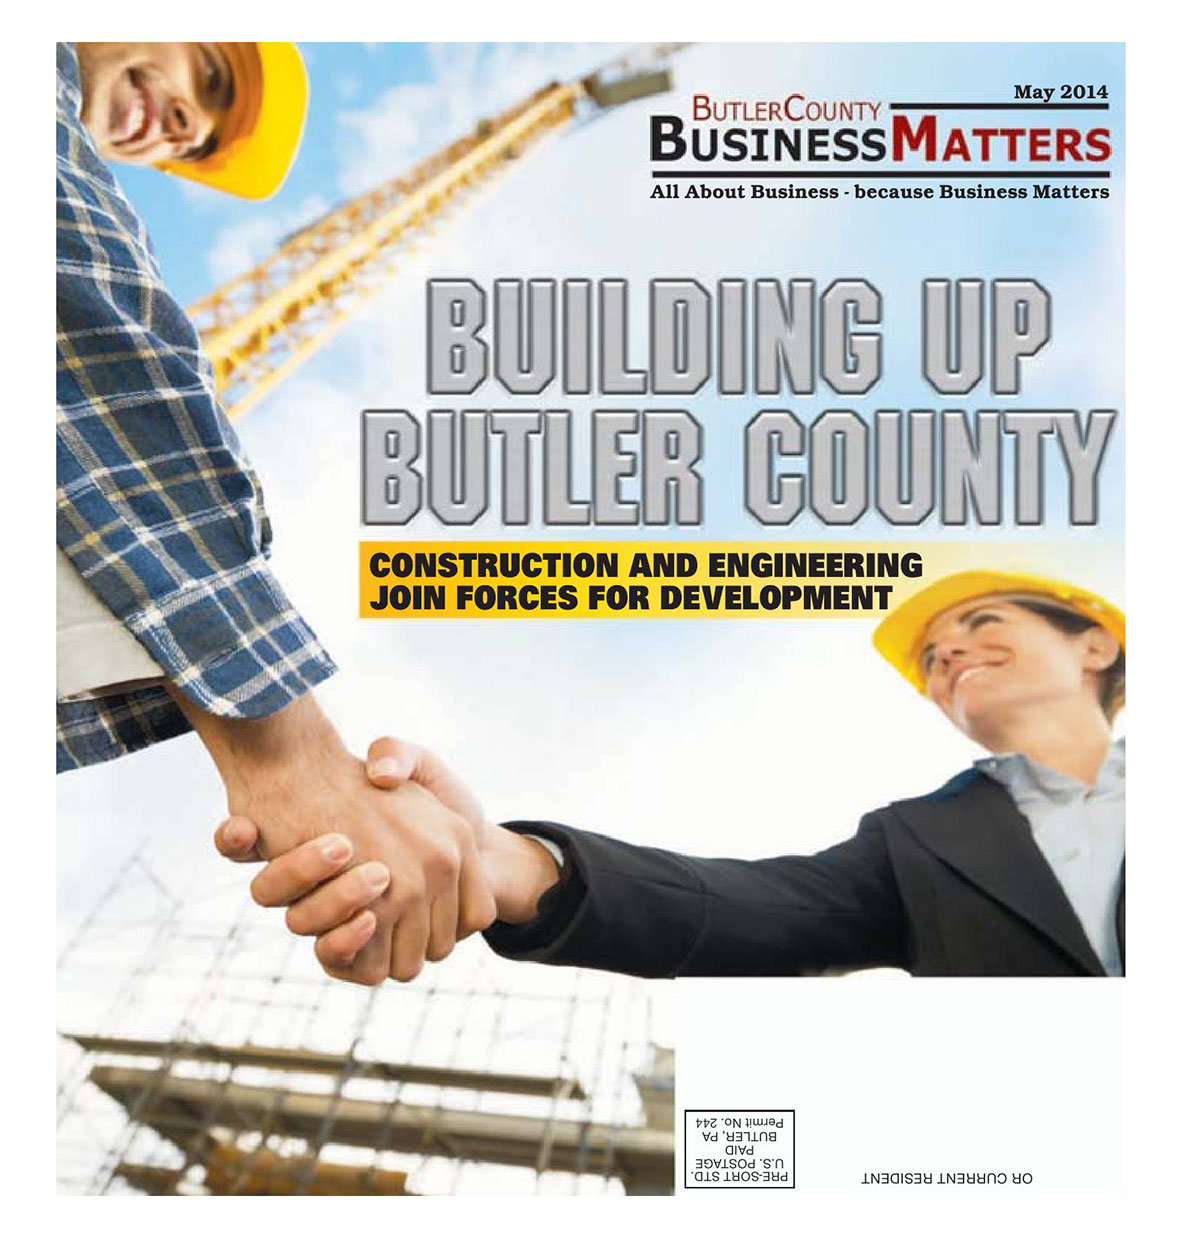 May 2014 - Building Up Butler County - Construction and Engineering Join Forces for Development